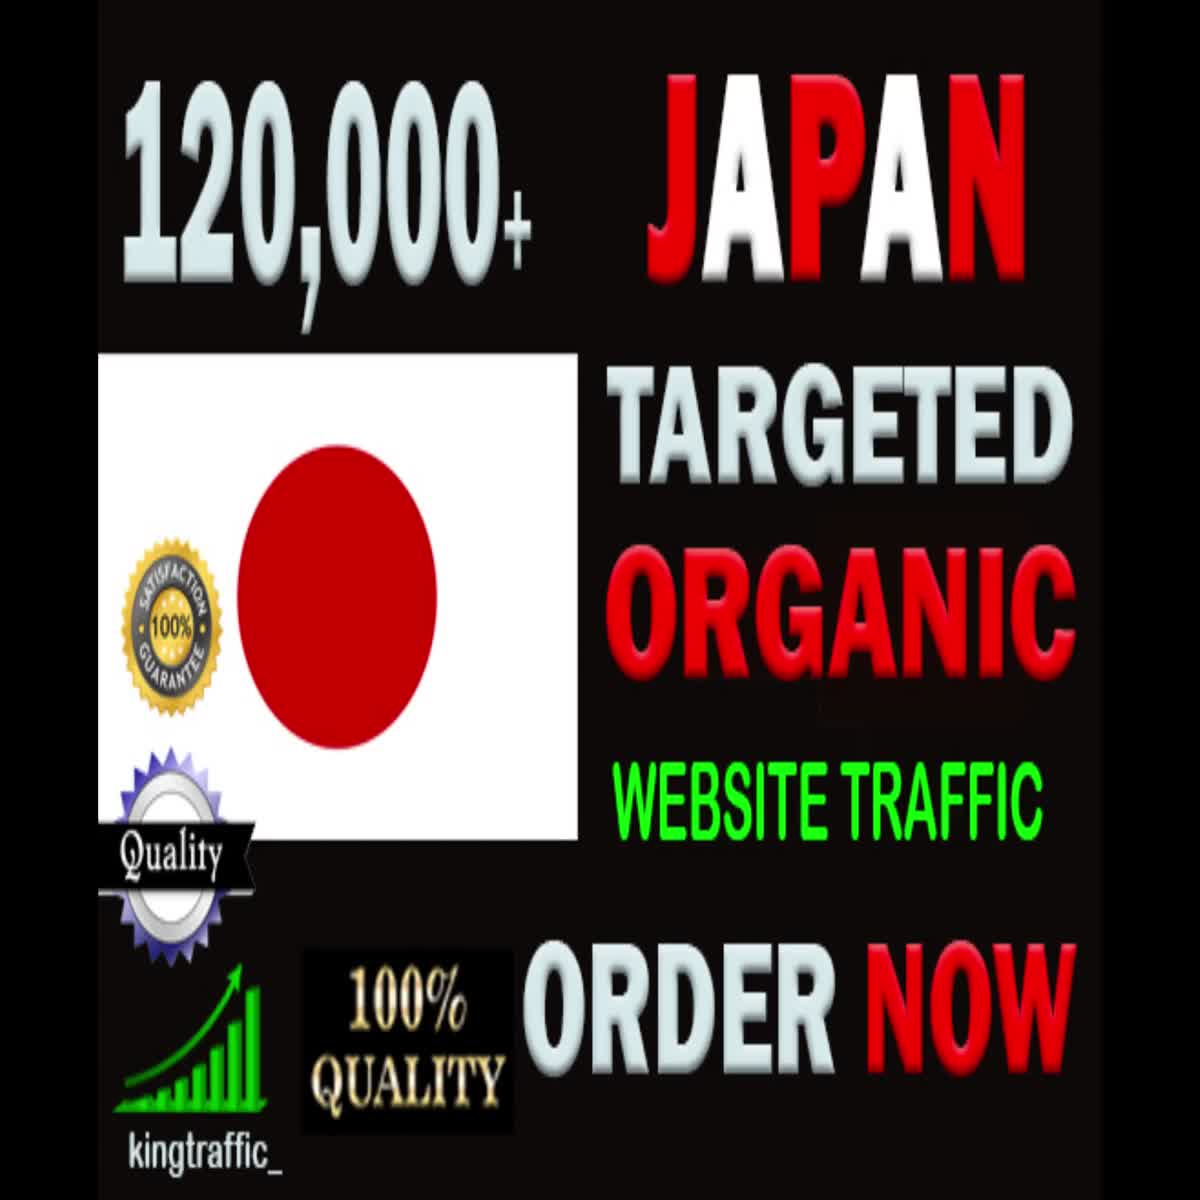 120,000 High Quality Japanese web visitors real targeted Genuine web traffic from Japan